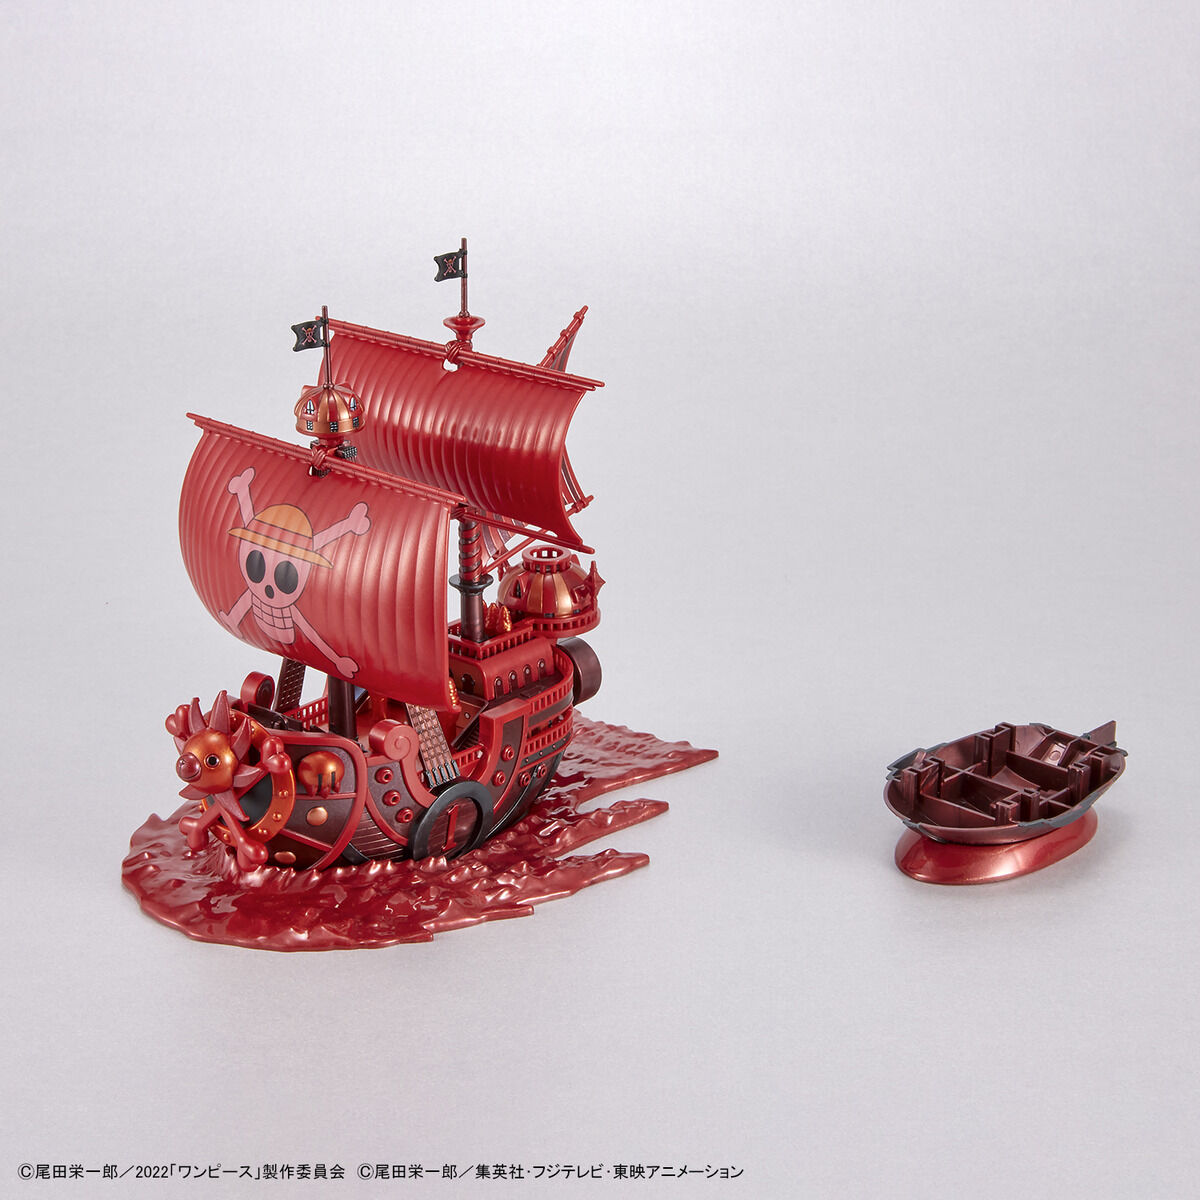 One Piece Grand Ship Collection Thousand Sunny "FILM RED" Release Commemorative Color Ver.